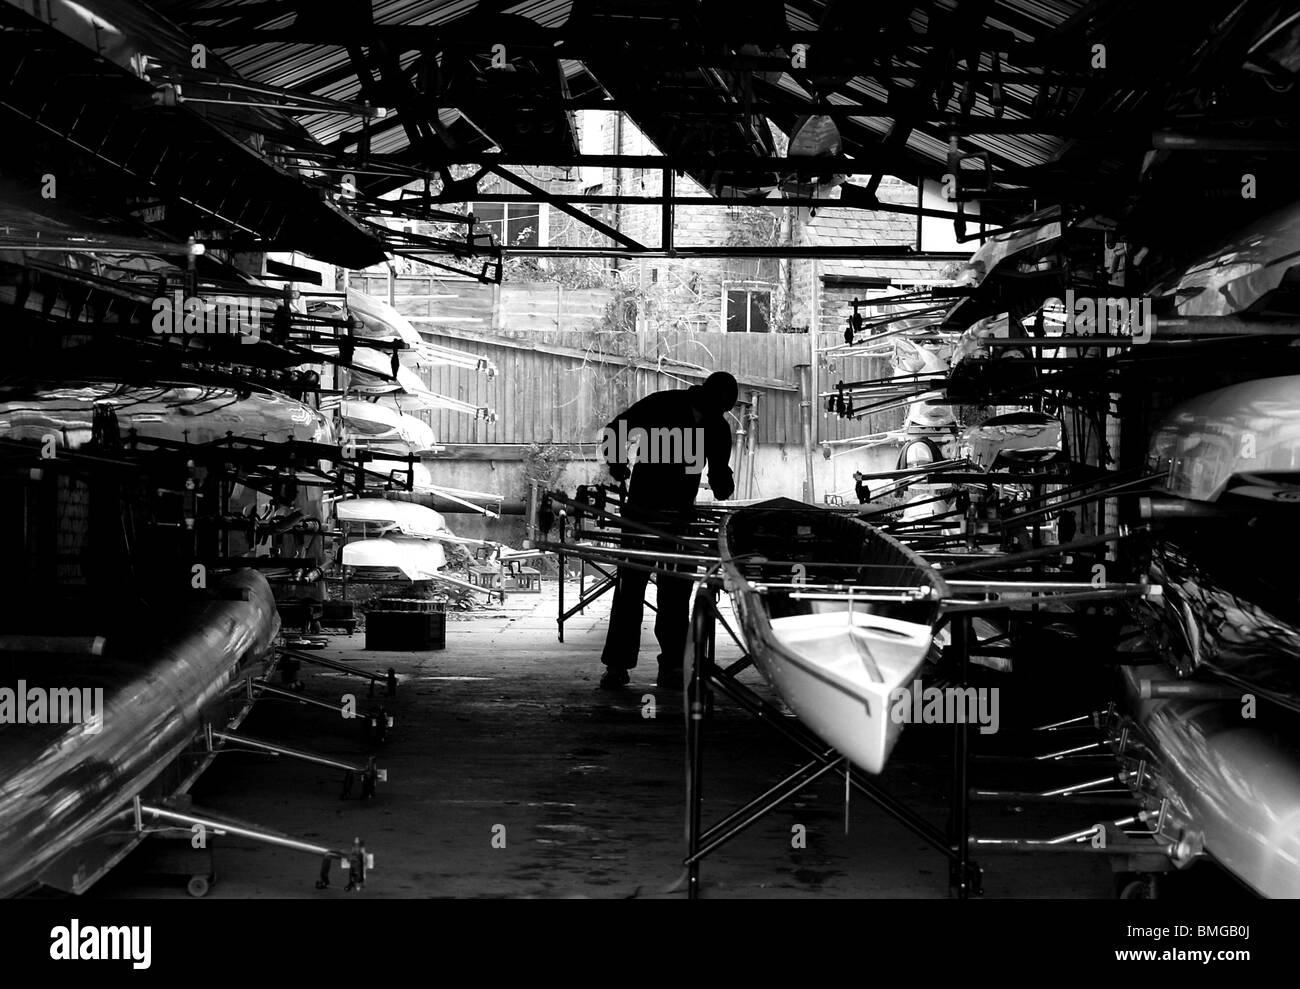 Rowing and sculling boats pictured in the Vesta Rowing Club boat shed at the Mens Head of The River Race in London. Stock Photo